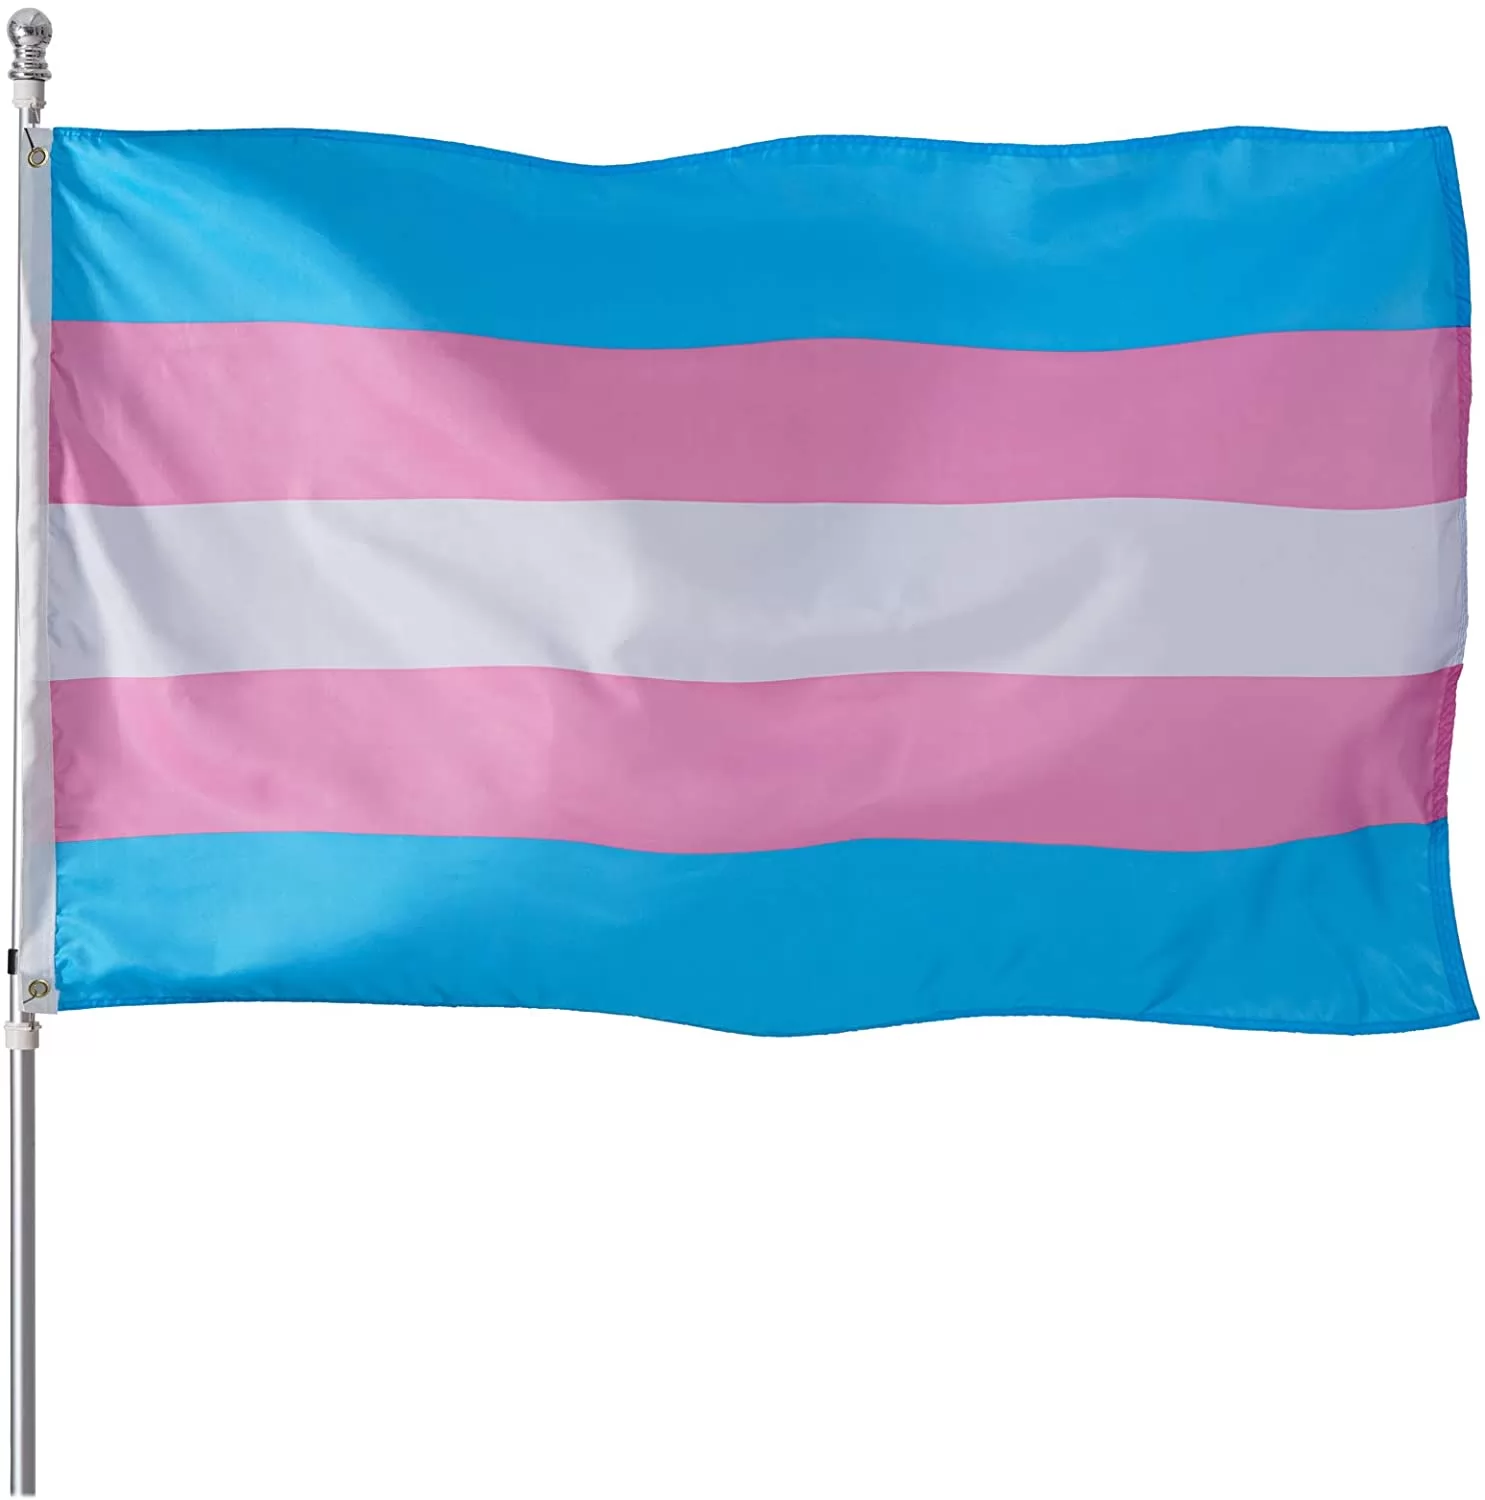 Homissor Transgender Pride Flag 3x5 Heavy Duty Polyester LGBT Trans Omnisexual Equality Flags for Outdoor Wall with Brass Grommets & Durable Header